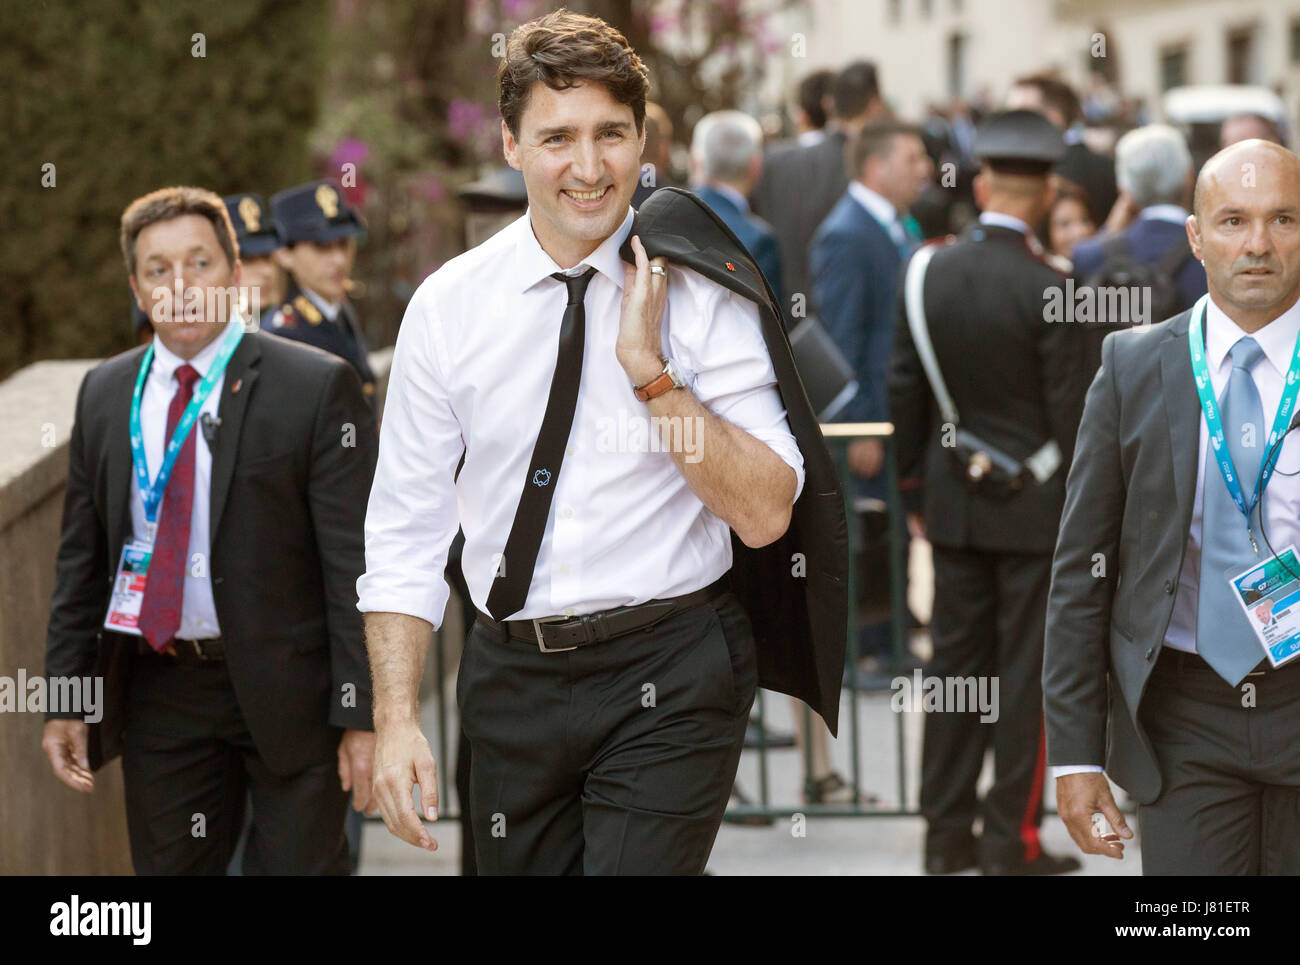 Taormina, Italy. 26th May, 2017. Canada's prime minister Justin Trudeau (M) can be seen on his way to a concert at the Greek Theatre in Taormina, Italy, 26 May 2017. The heads of goverment of the G7 member states have gathered for the summit to be held from 26 May to 27 May 2017 Photo: Michael Kappeler/dpa/Alamy Live News Stock Photo